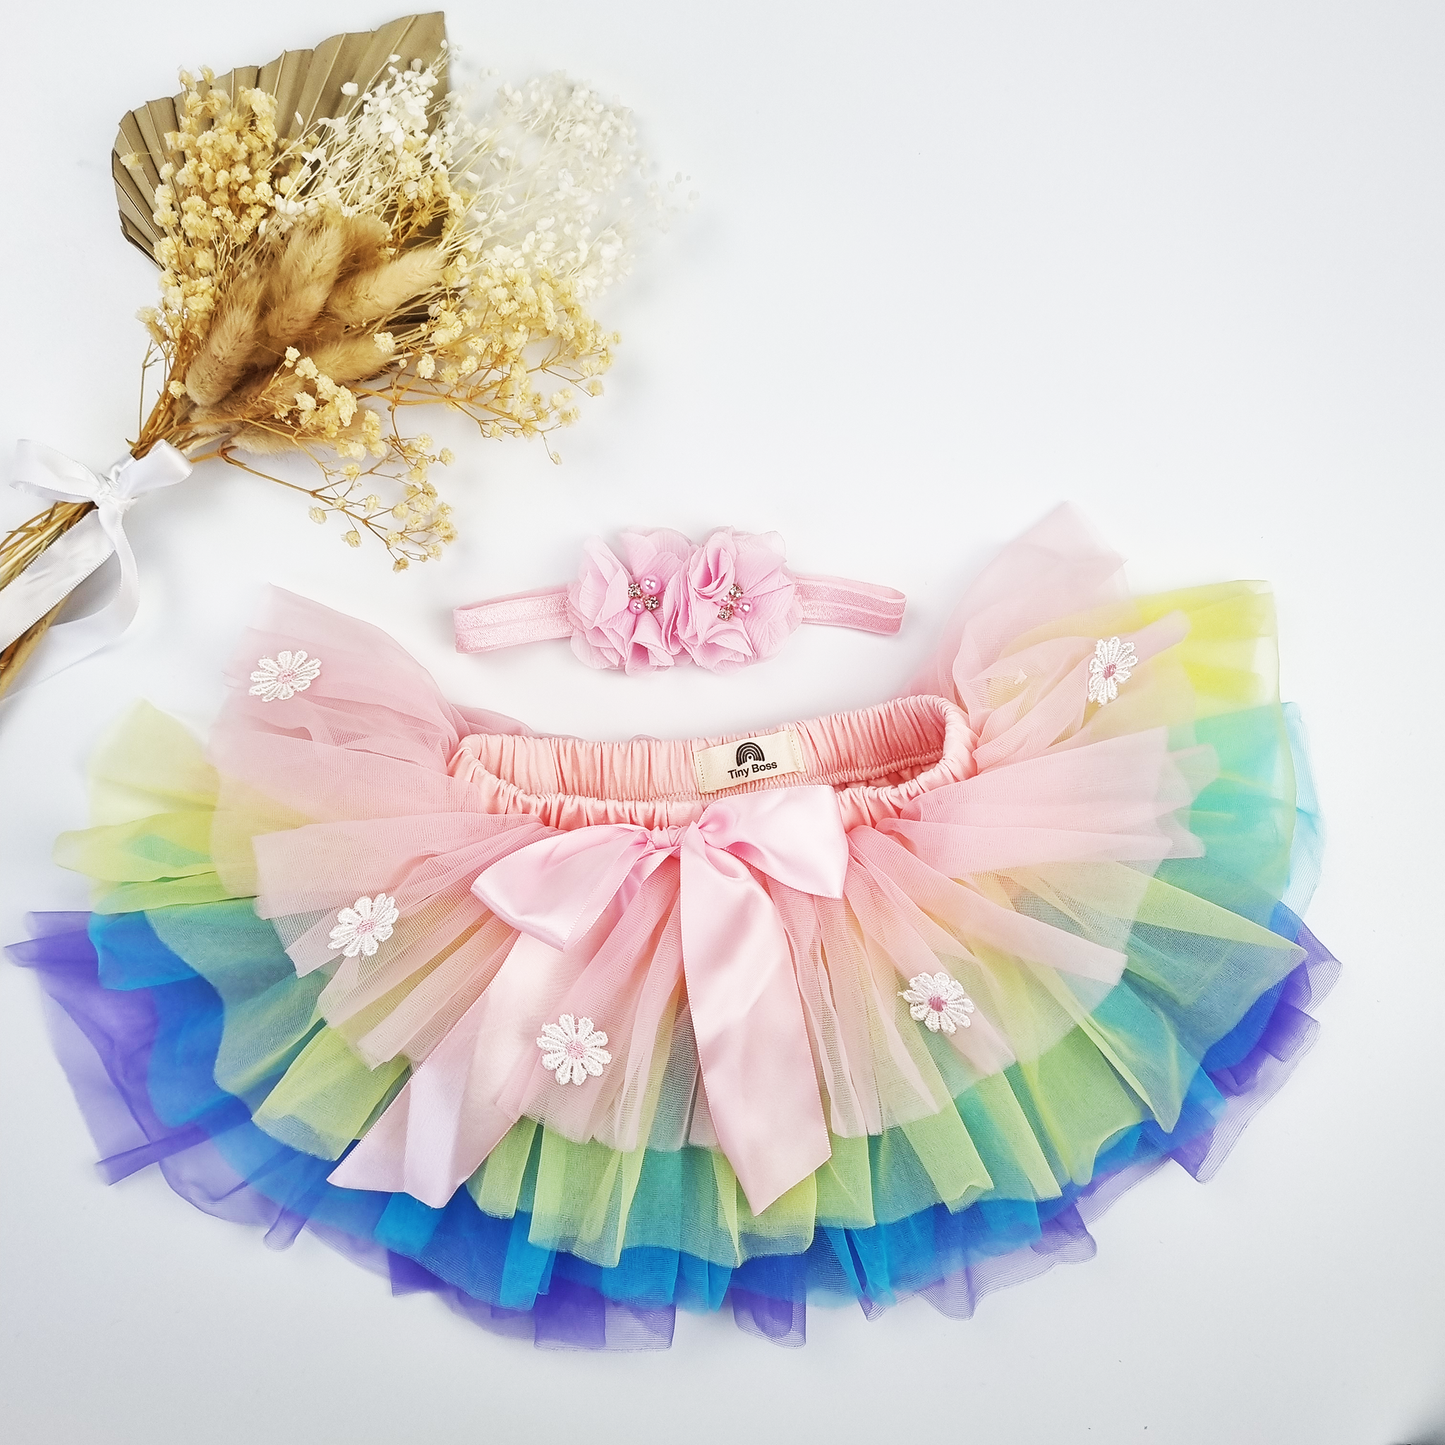 Baby Pink Soft Layered Tutu Skirt with Embroidered flowers and Headband Set